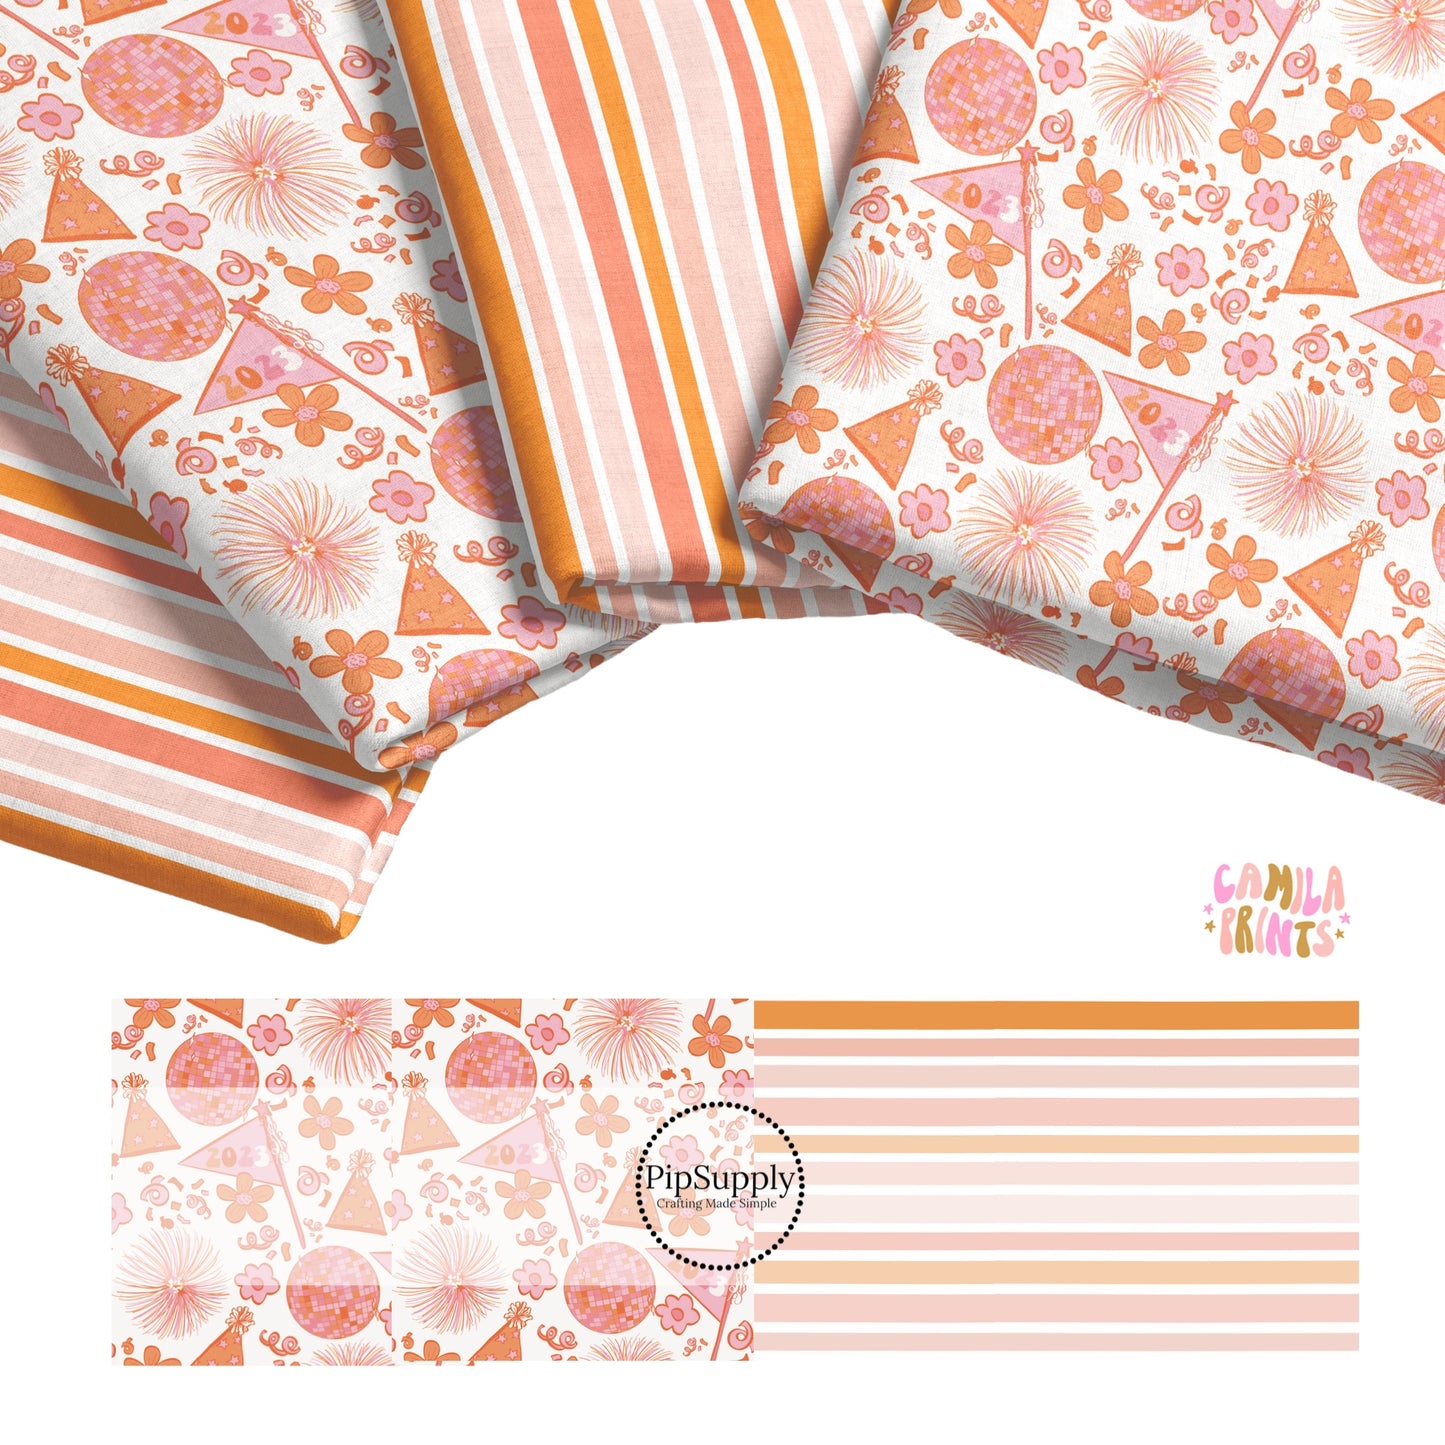 peach and nude colored fabric stackillustration